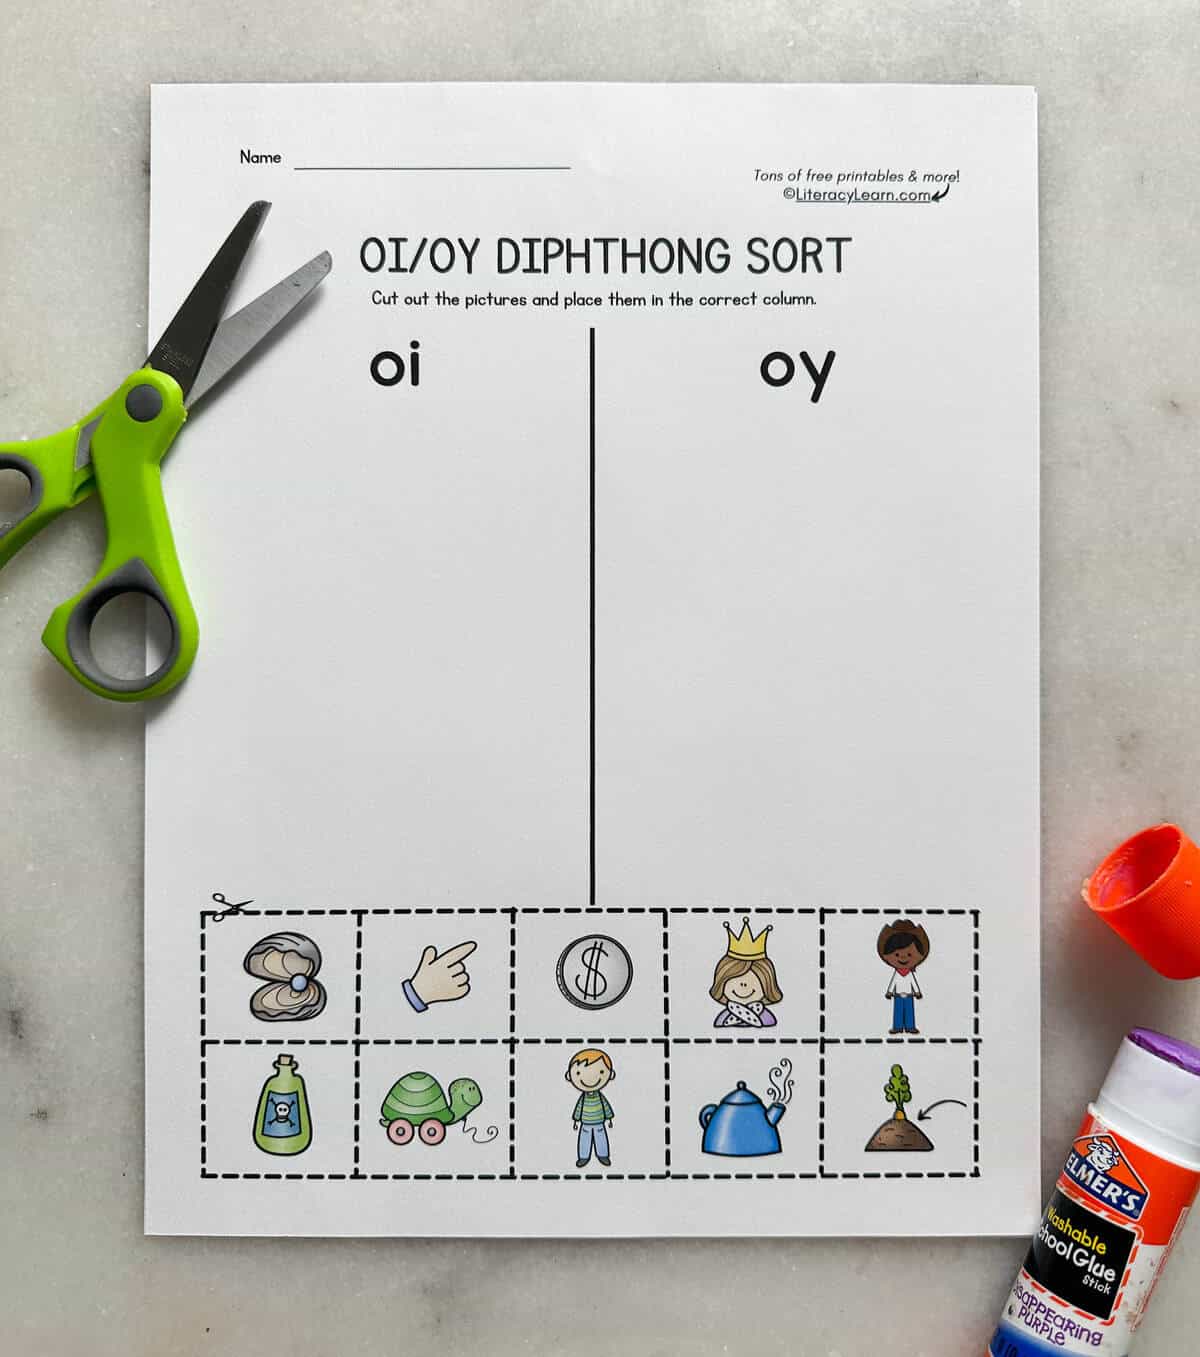 A printed oy and oi picture word sort with scissors and a glue stick. 